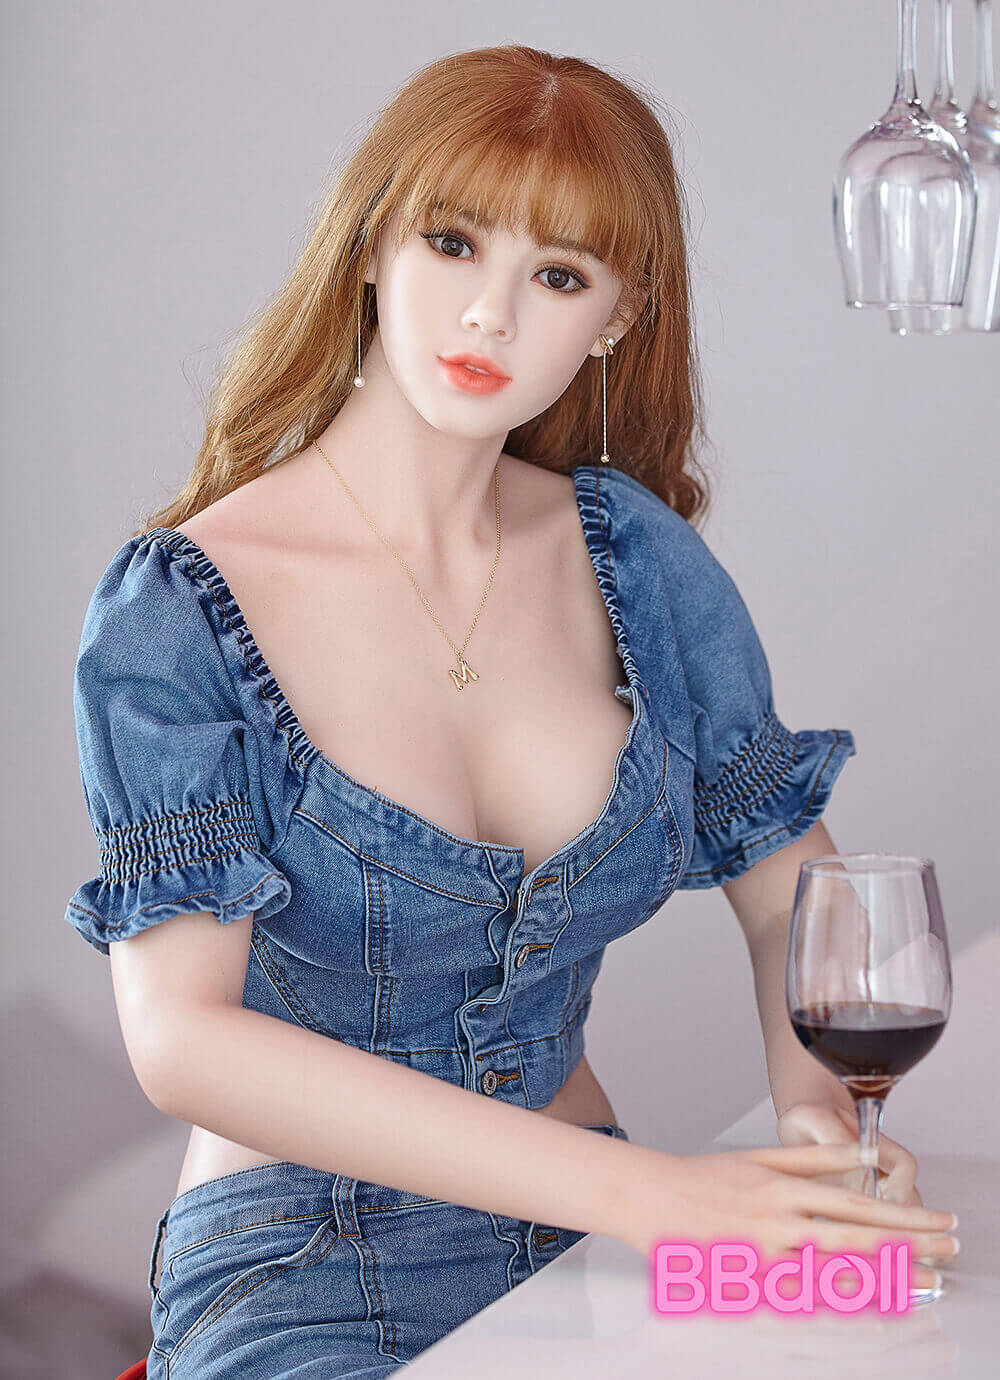 famous actress sex doll